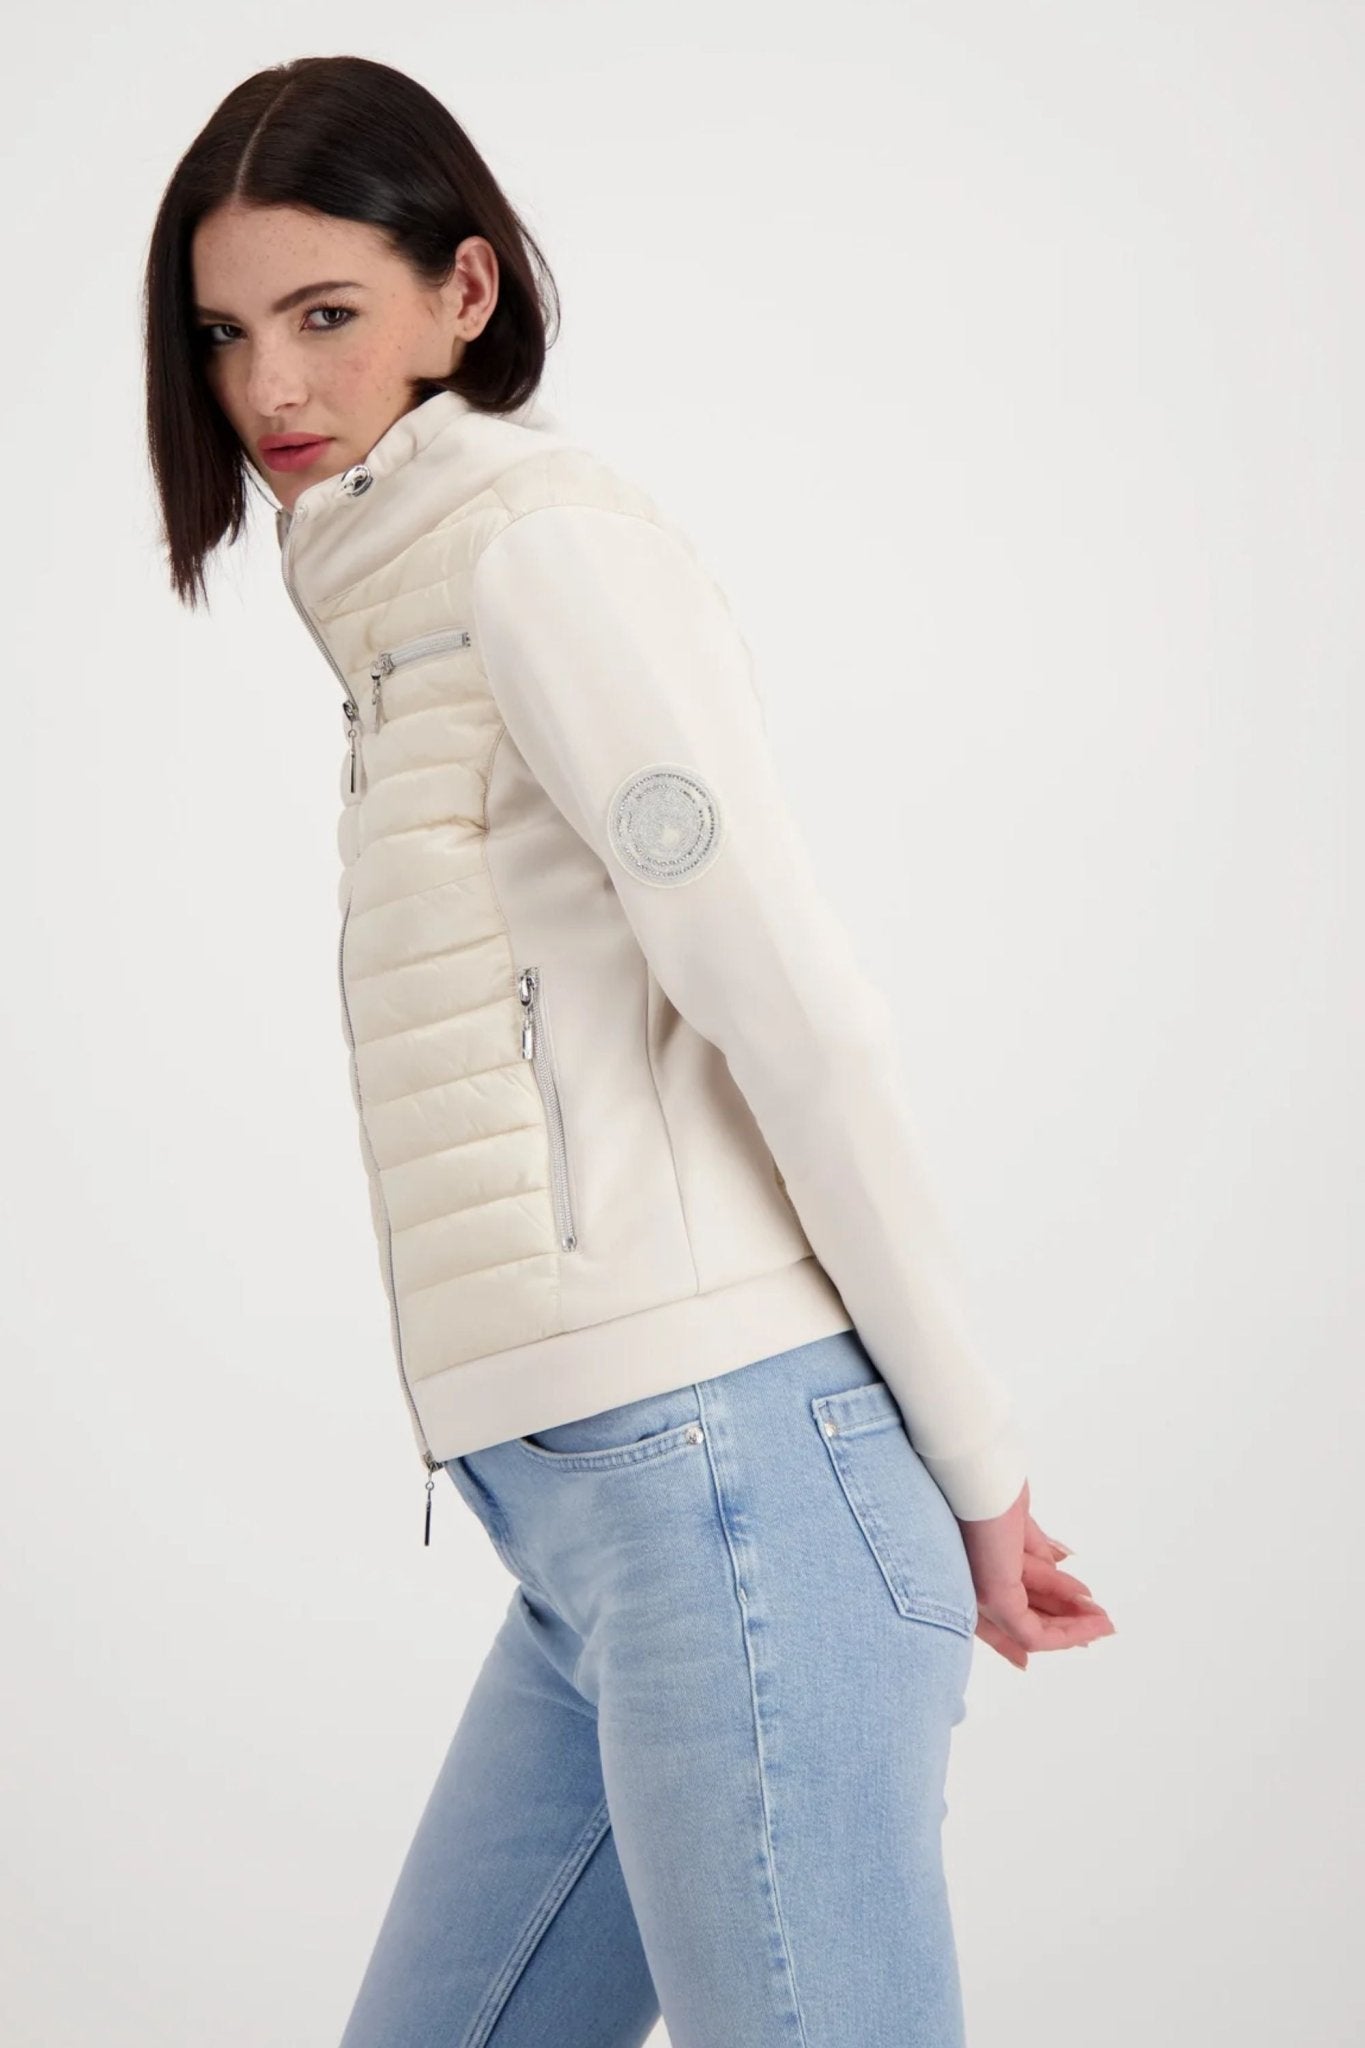 QUILTED JACKET - 407404